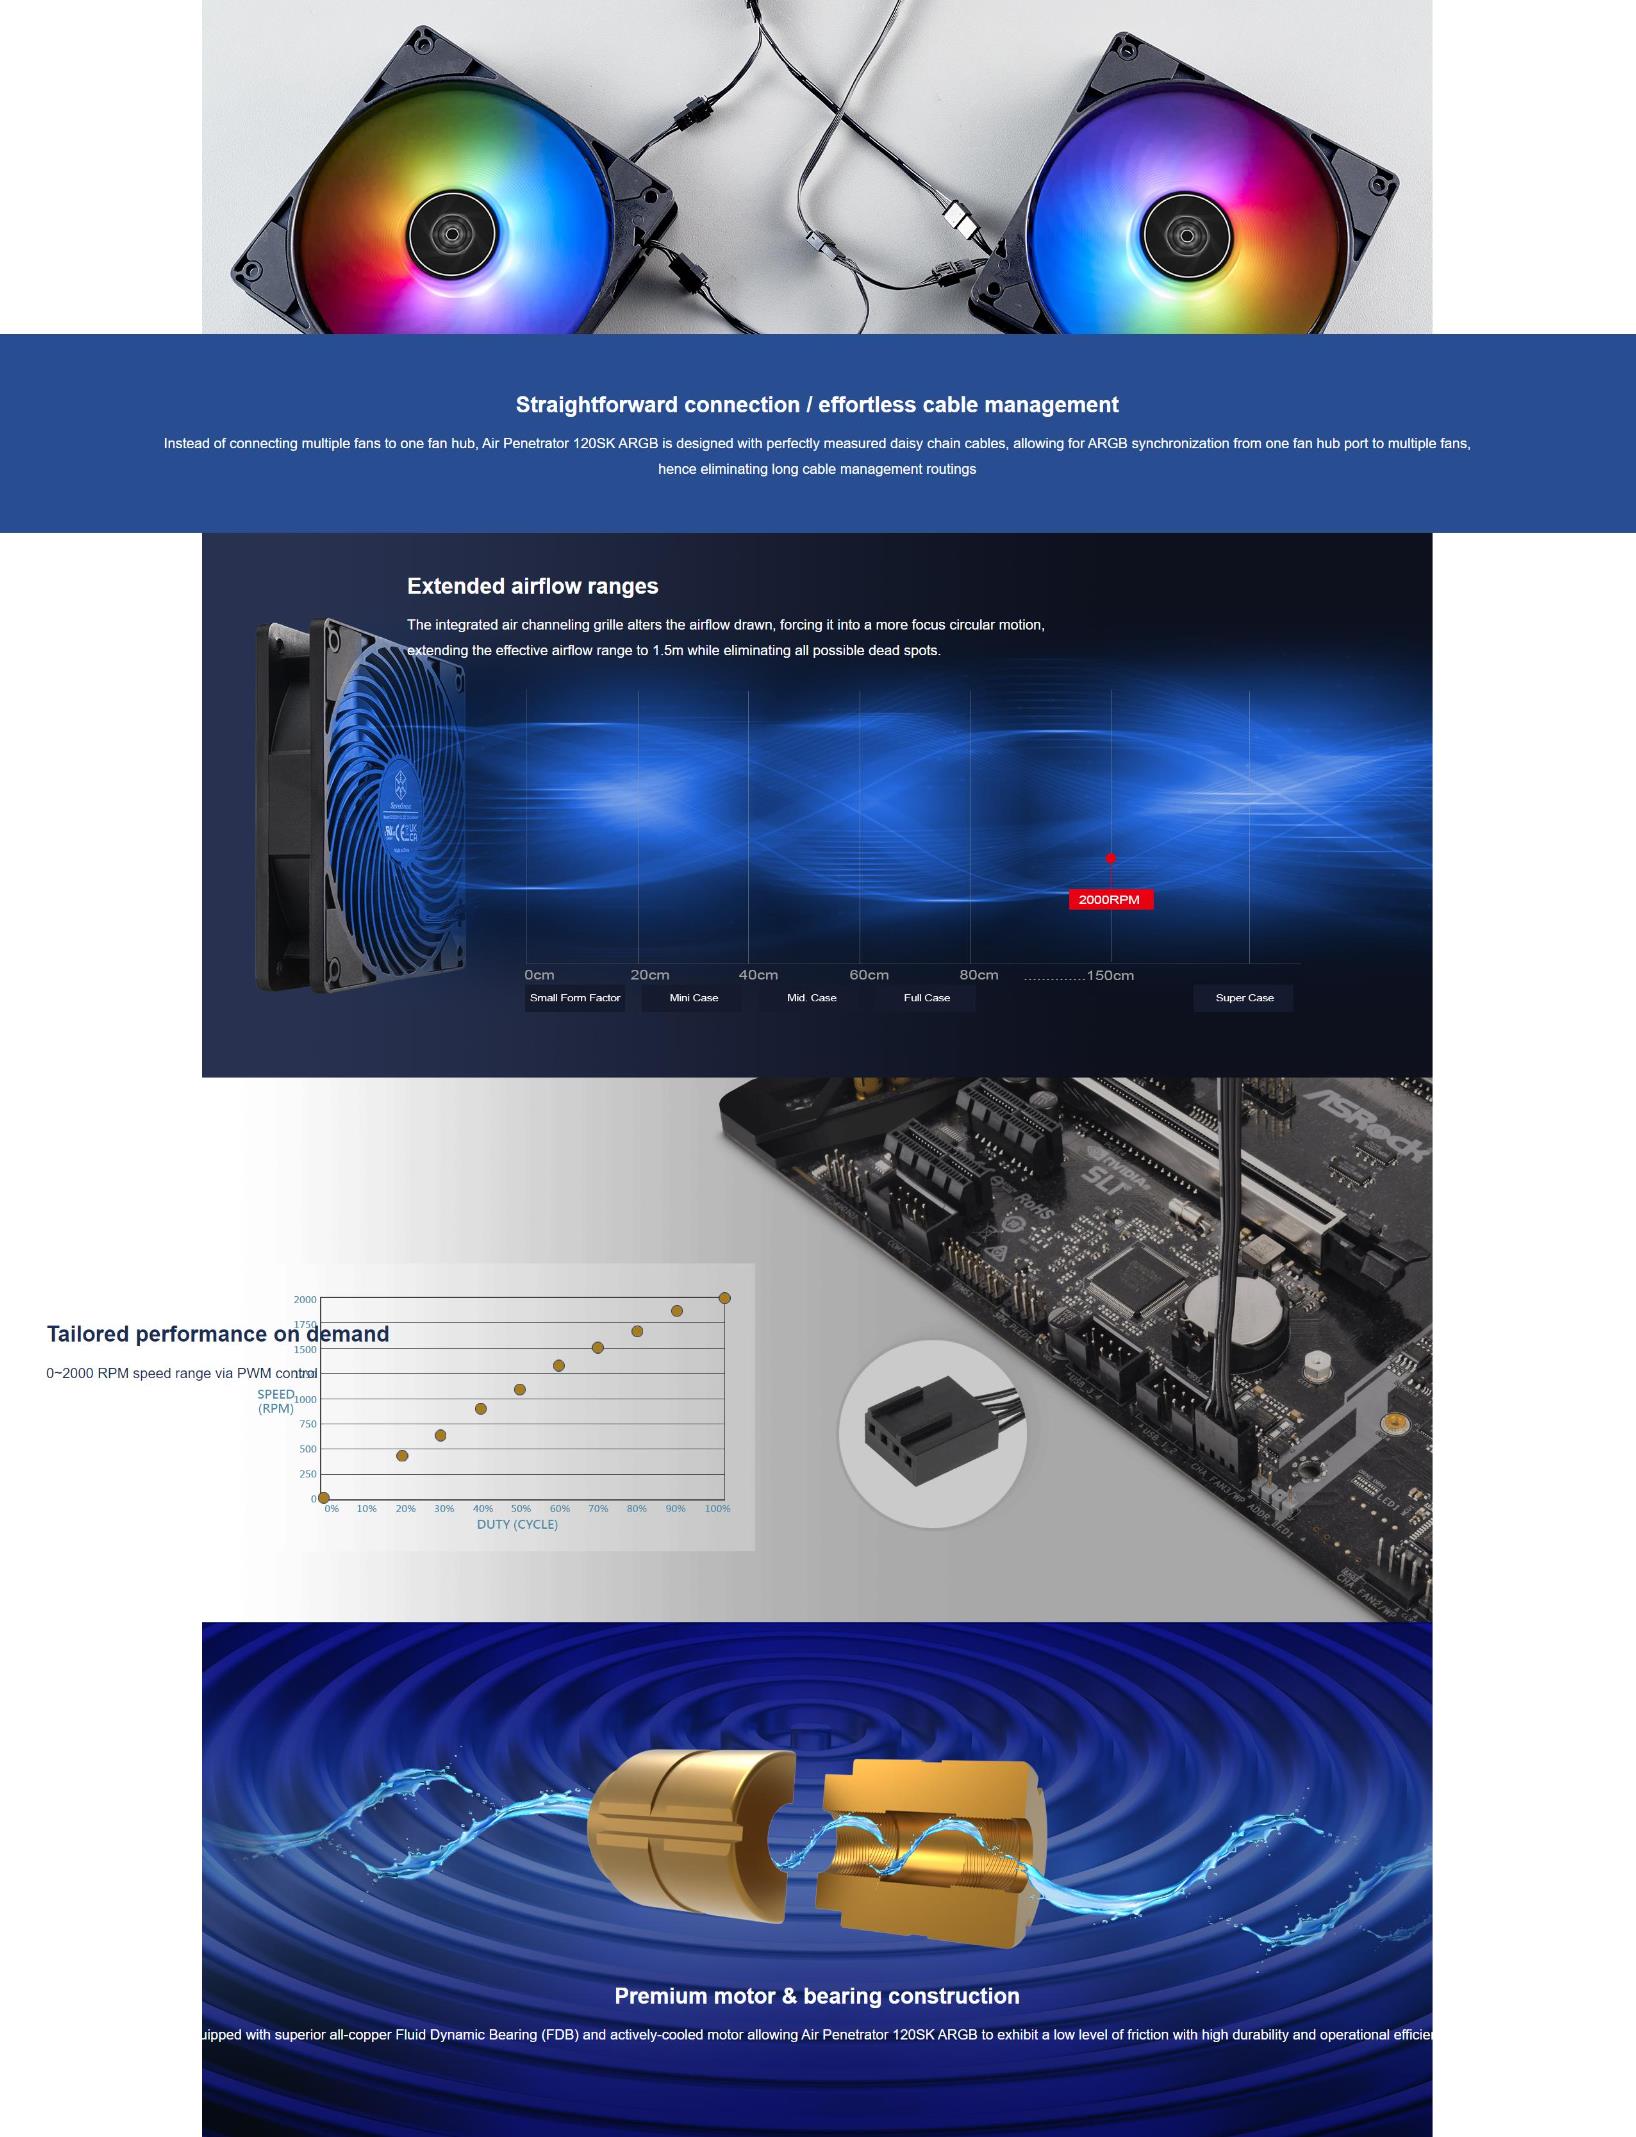 A large marketing image providing additional information about the product SilverStone Air Penetrator 120SK ARGB 120mm PWM Cooling Fan - Additional alt info not provided